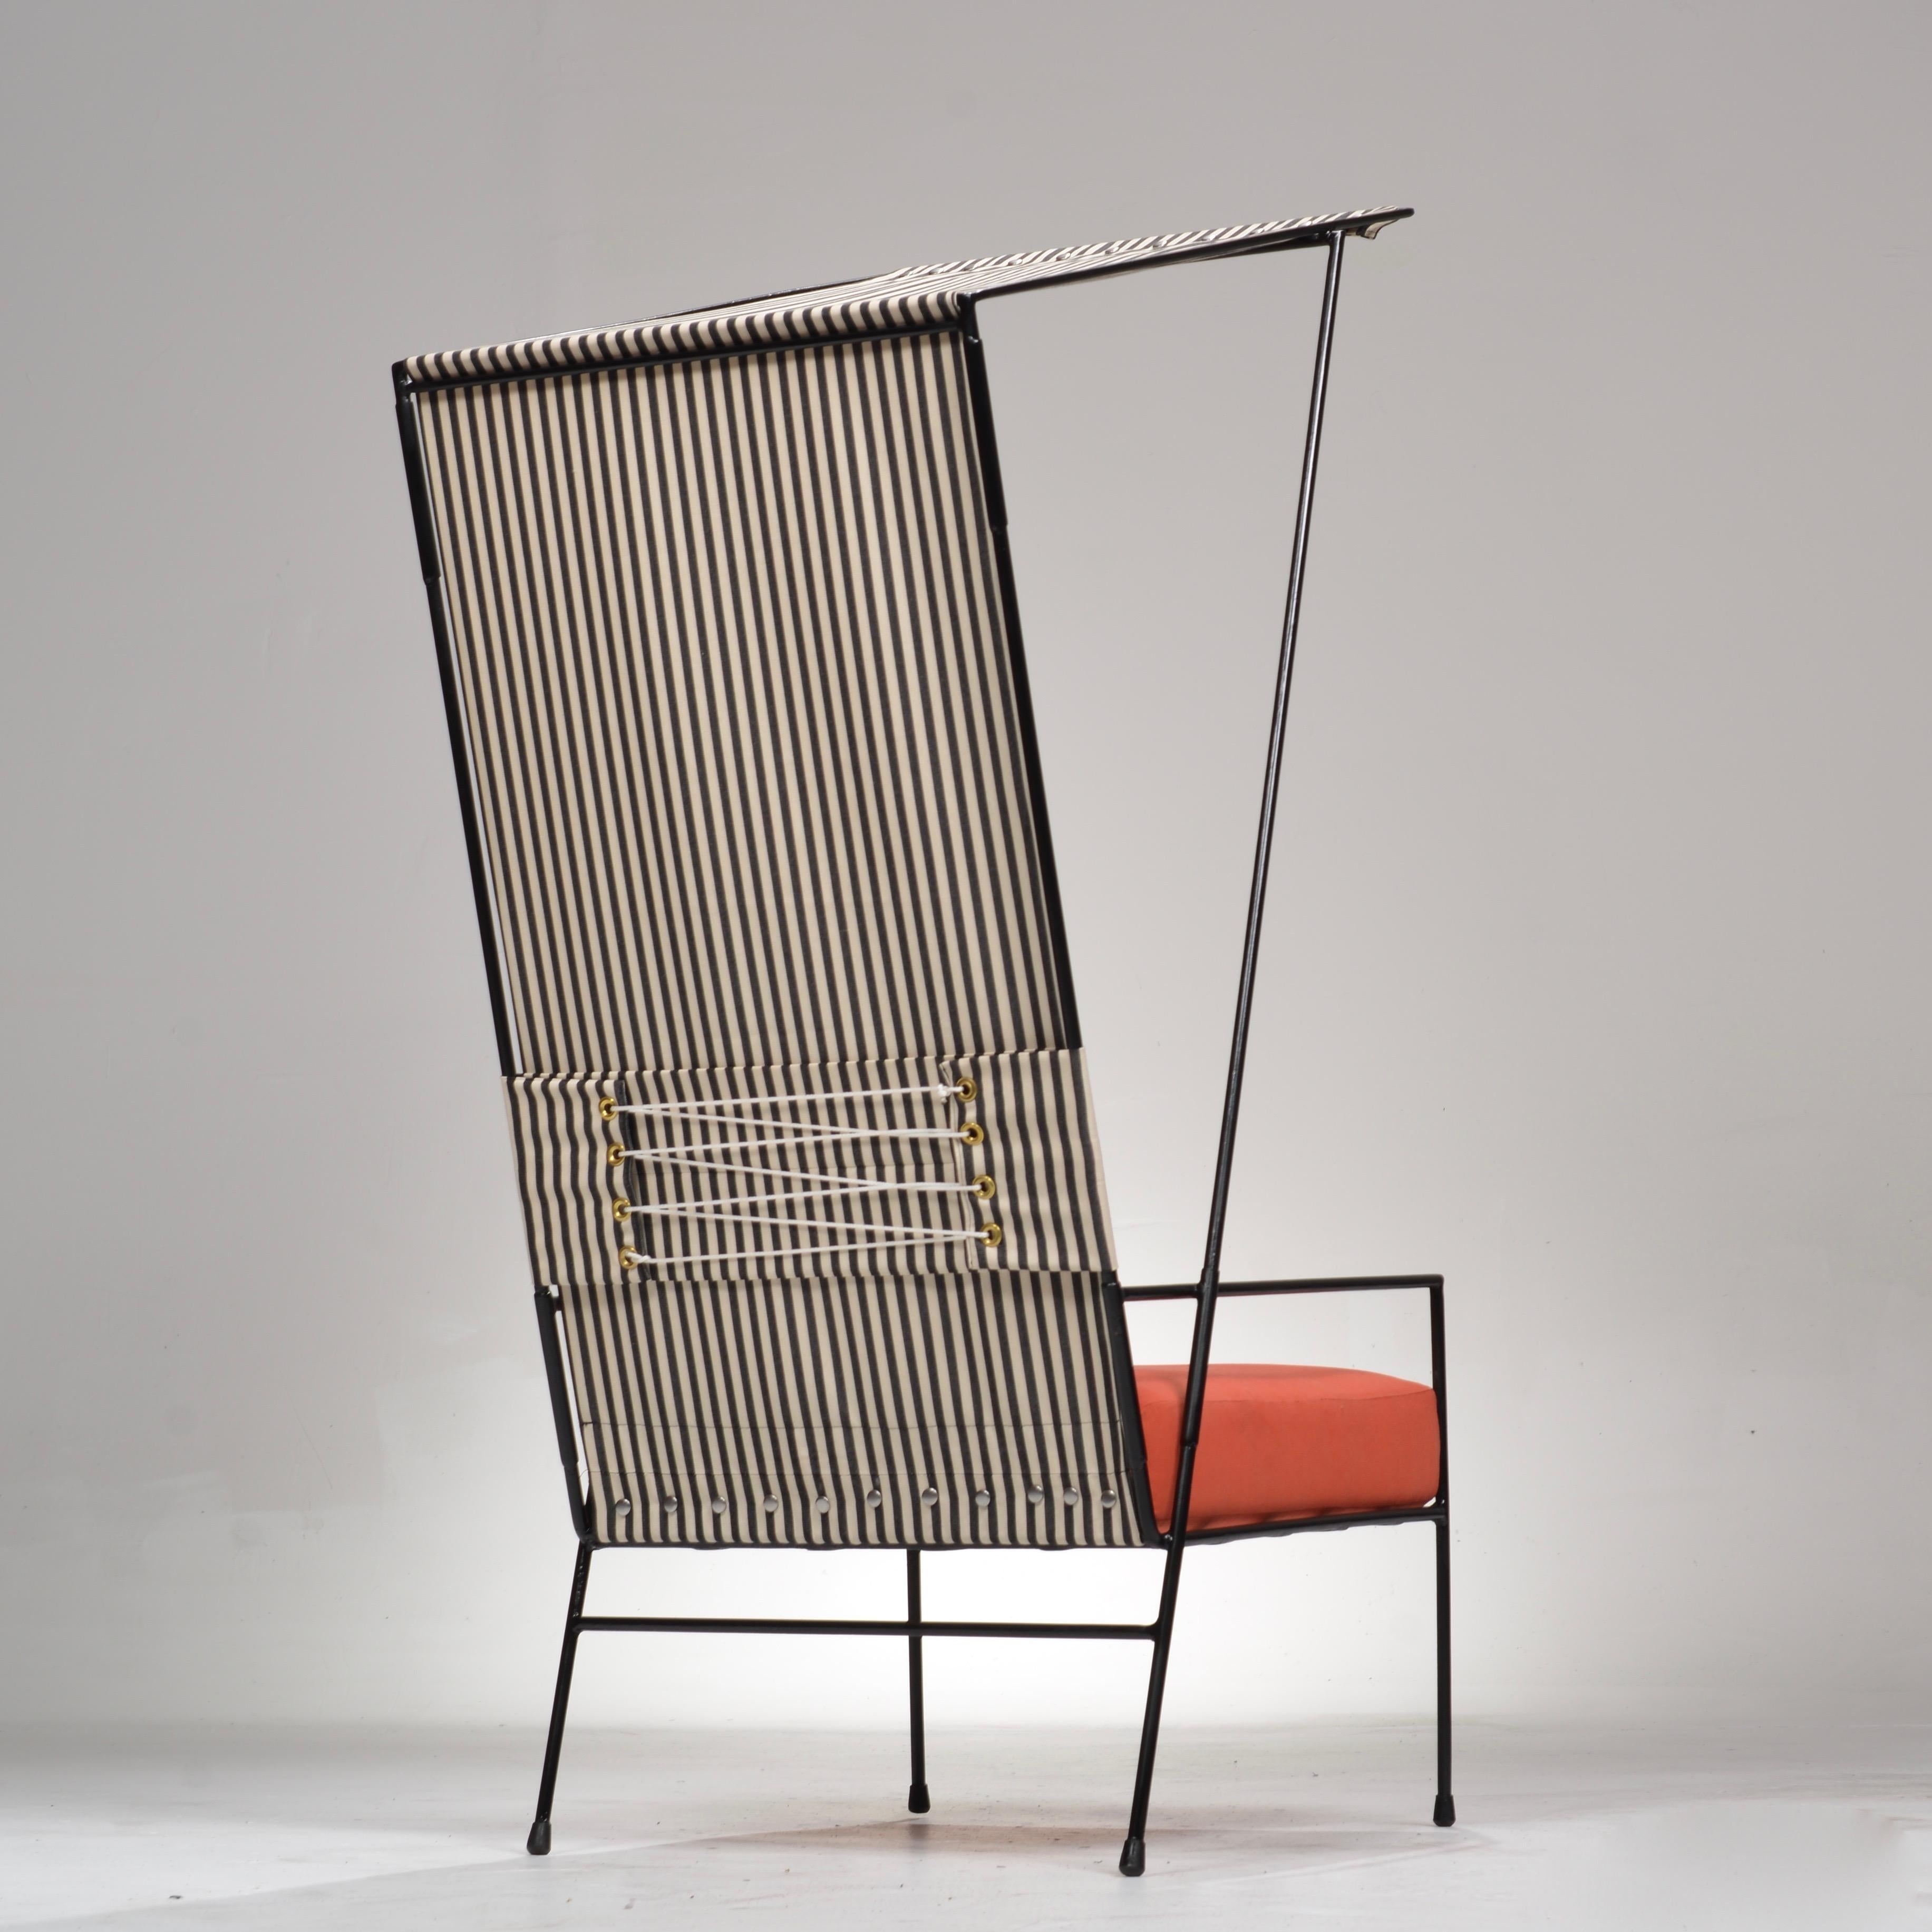 Steel Paul Mccobb Cabana Lounge Chairs for the Arbuck Pavilion Collection, 1952